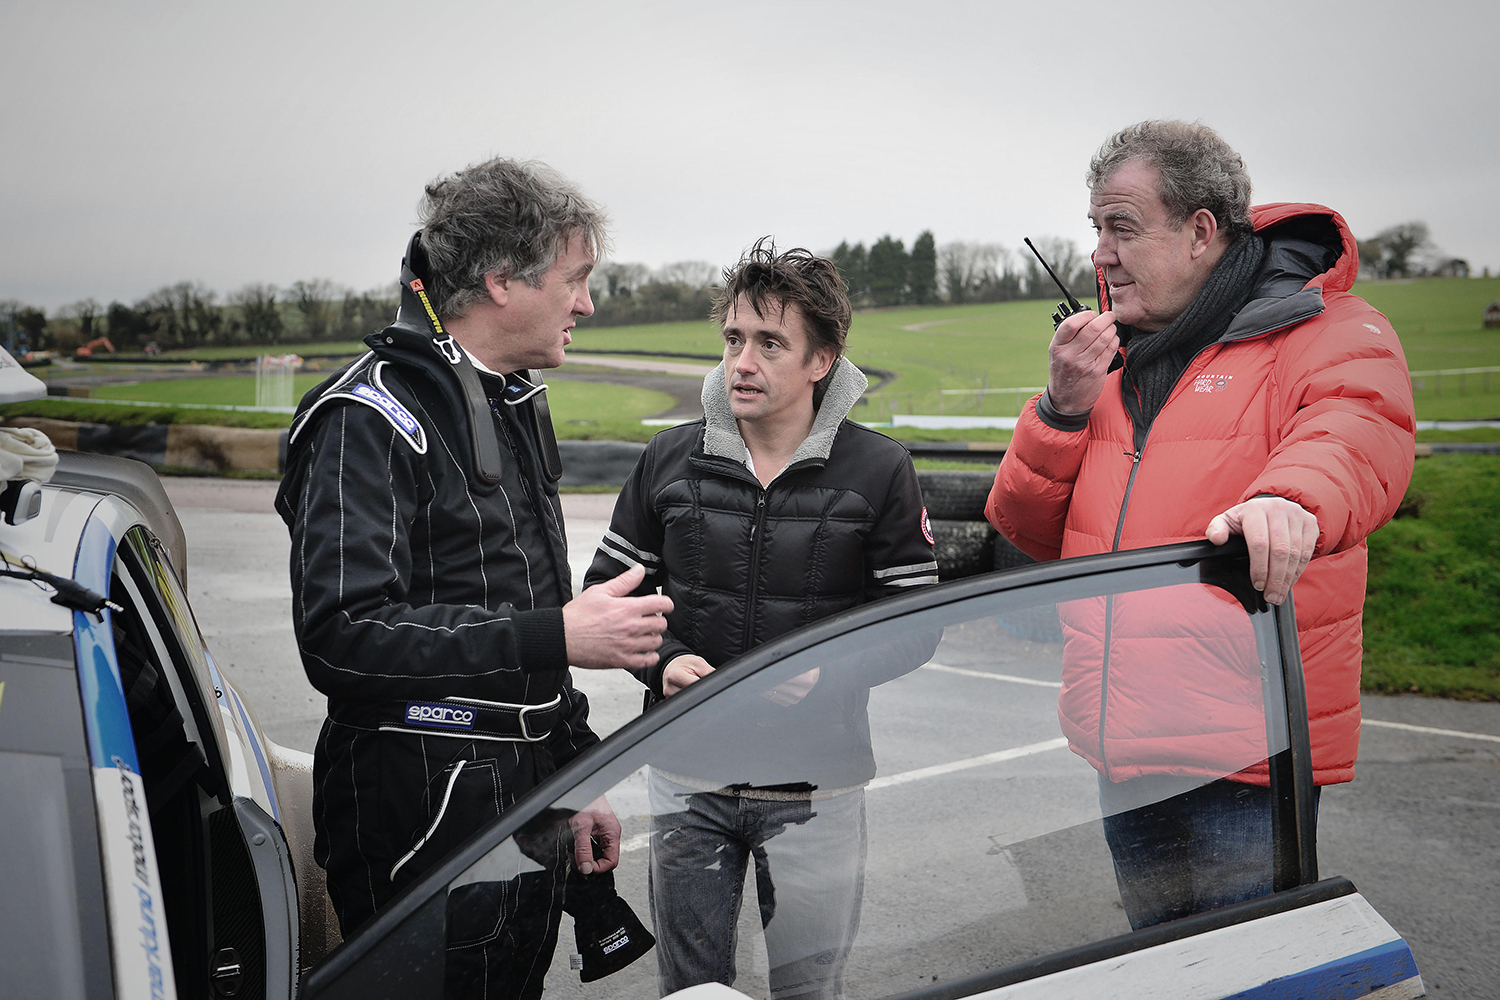 6 Iconic Moments From Top Gear Series 1, Top Gear Classic